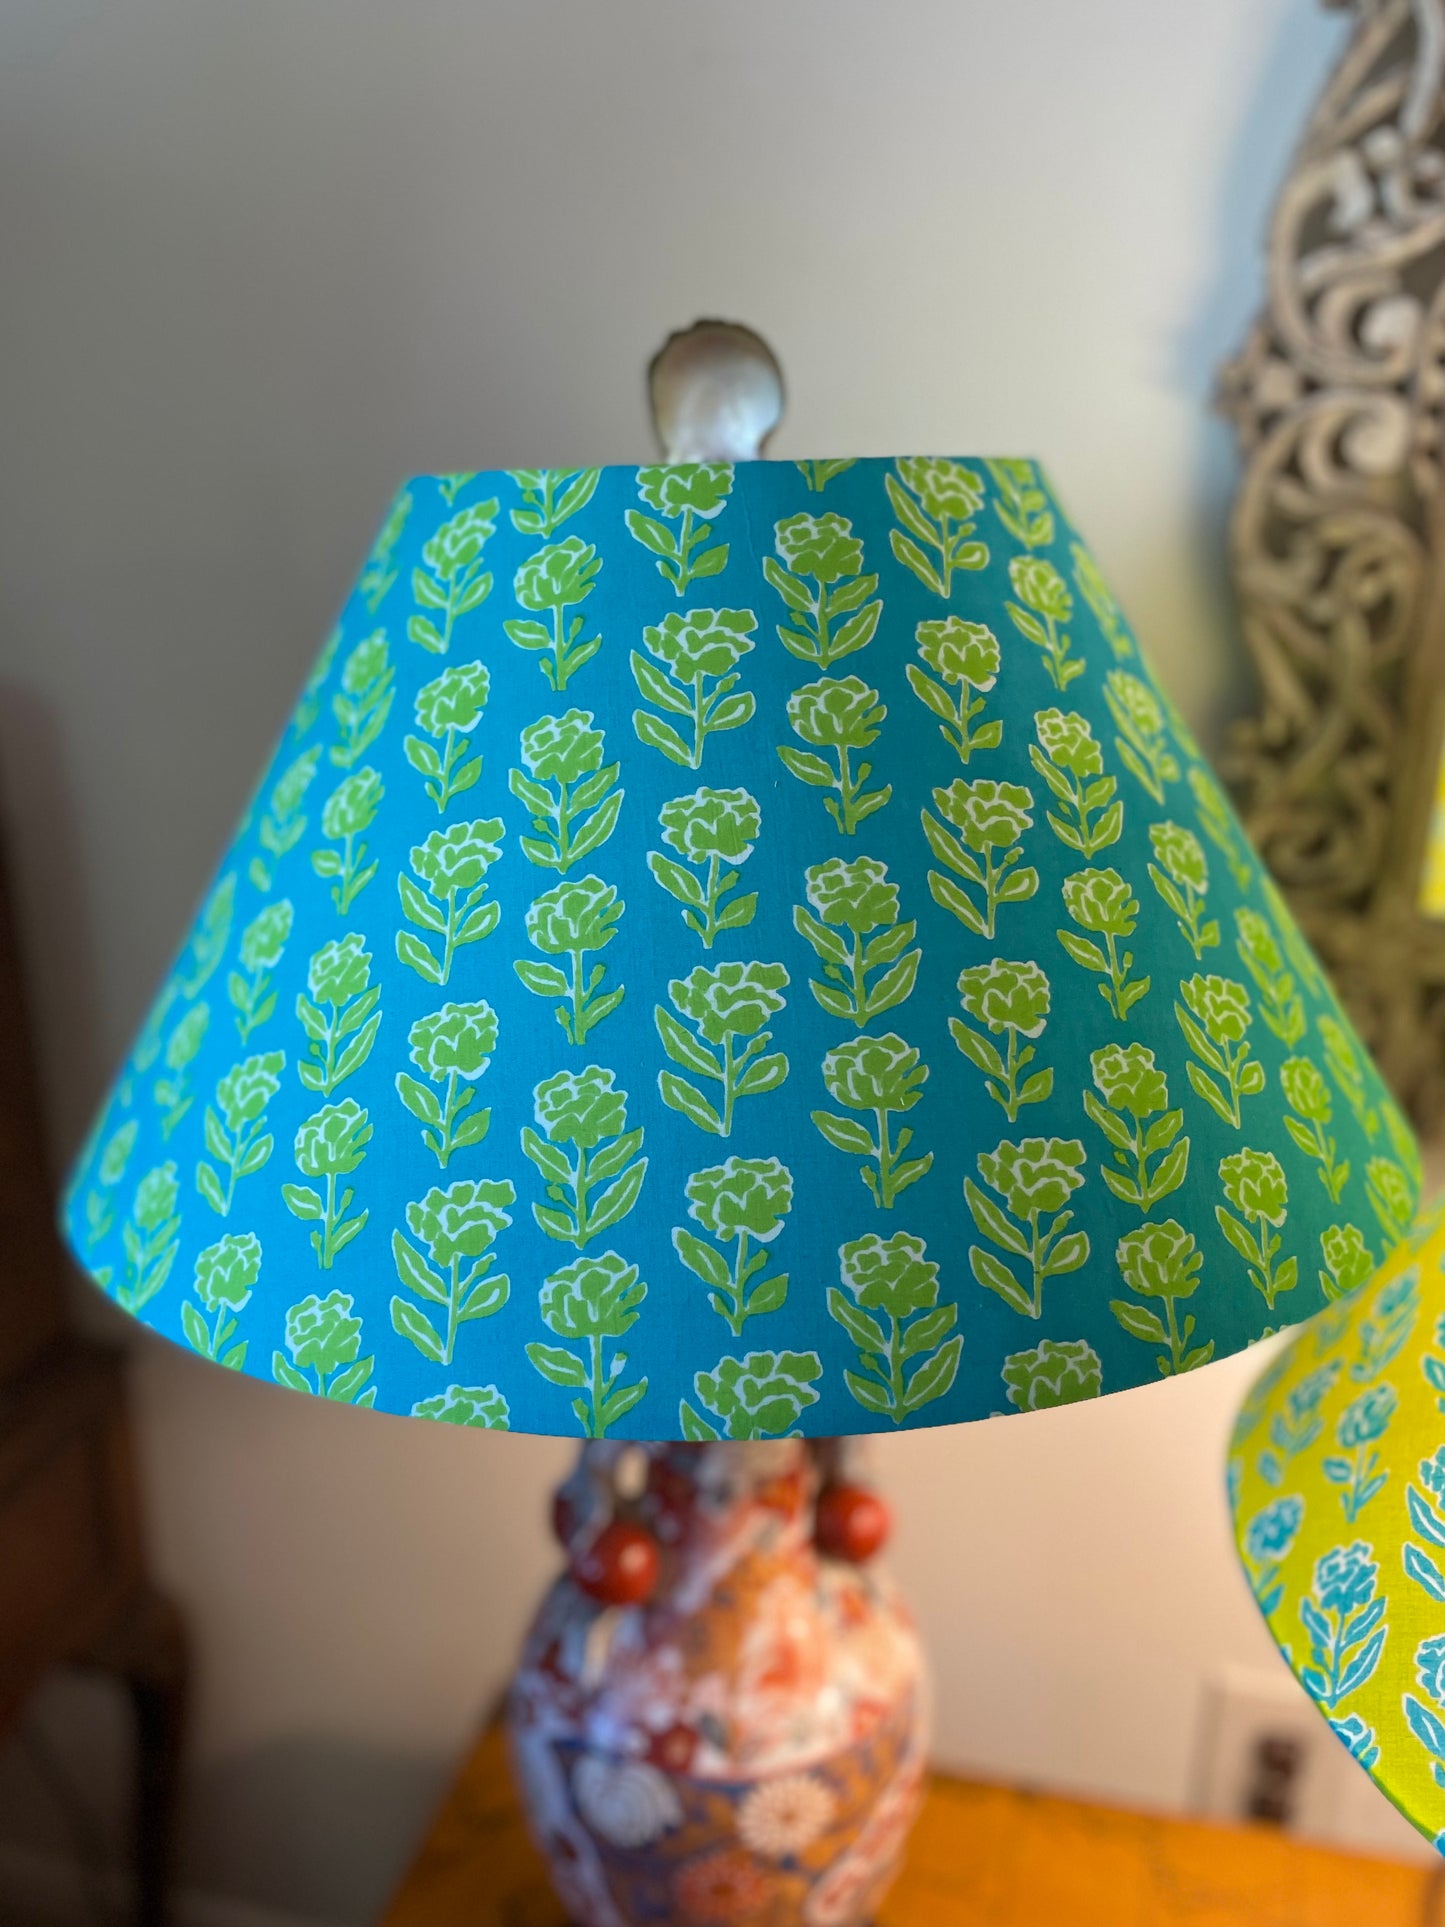 Large Conical Lampshade. Indian Block Print from Jaipur. Teal with Bright Avocado Floral.